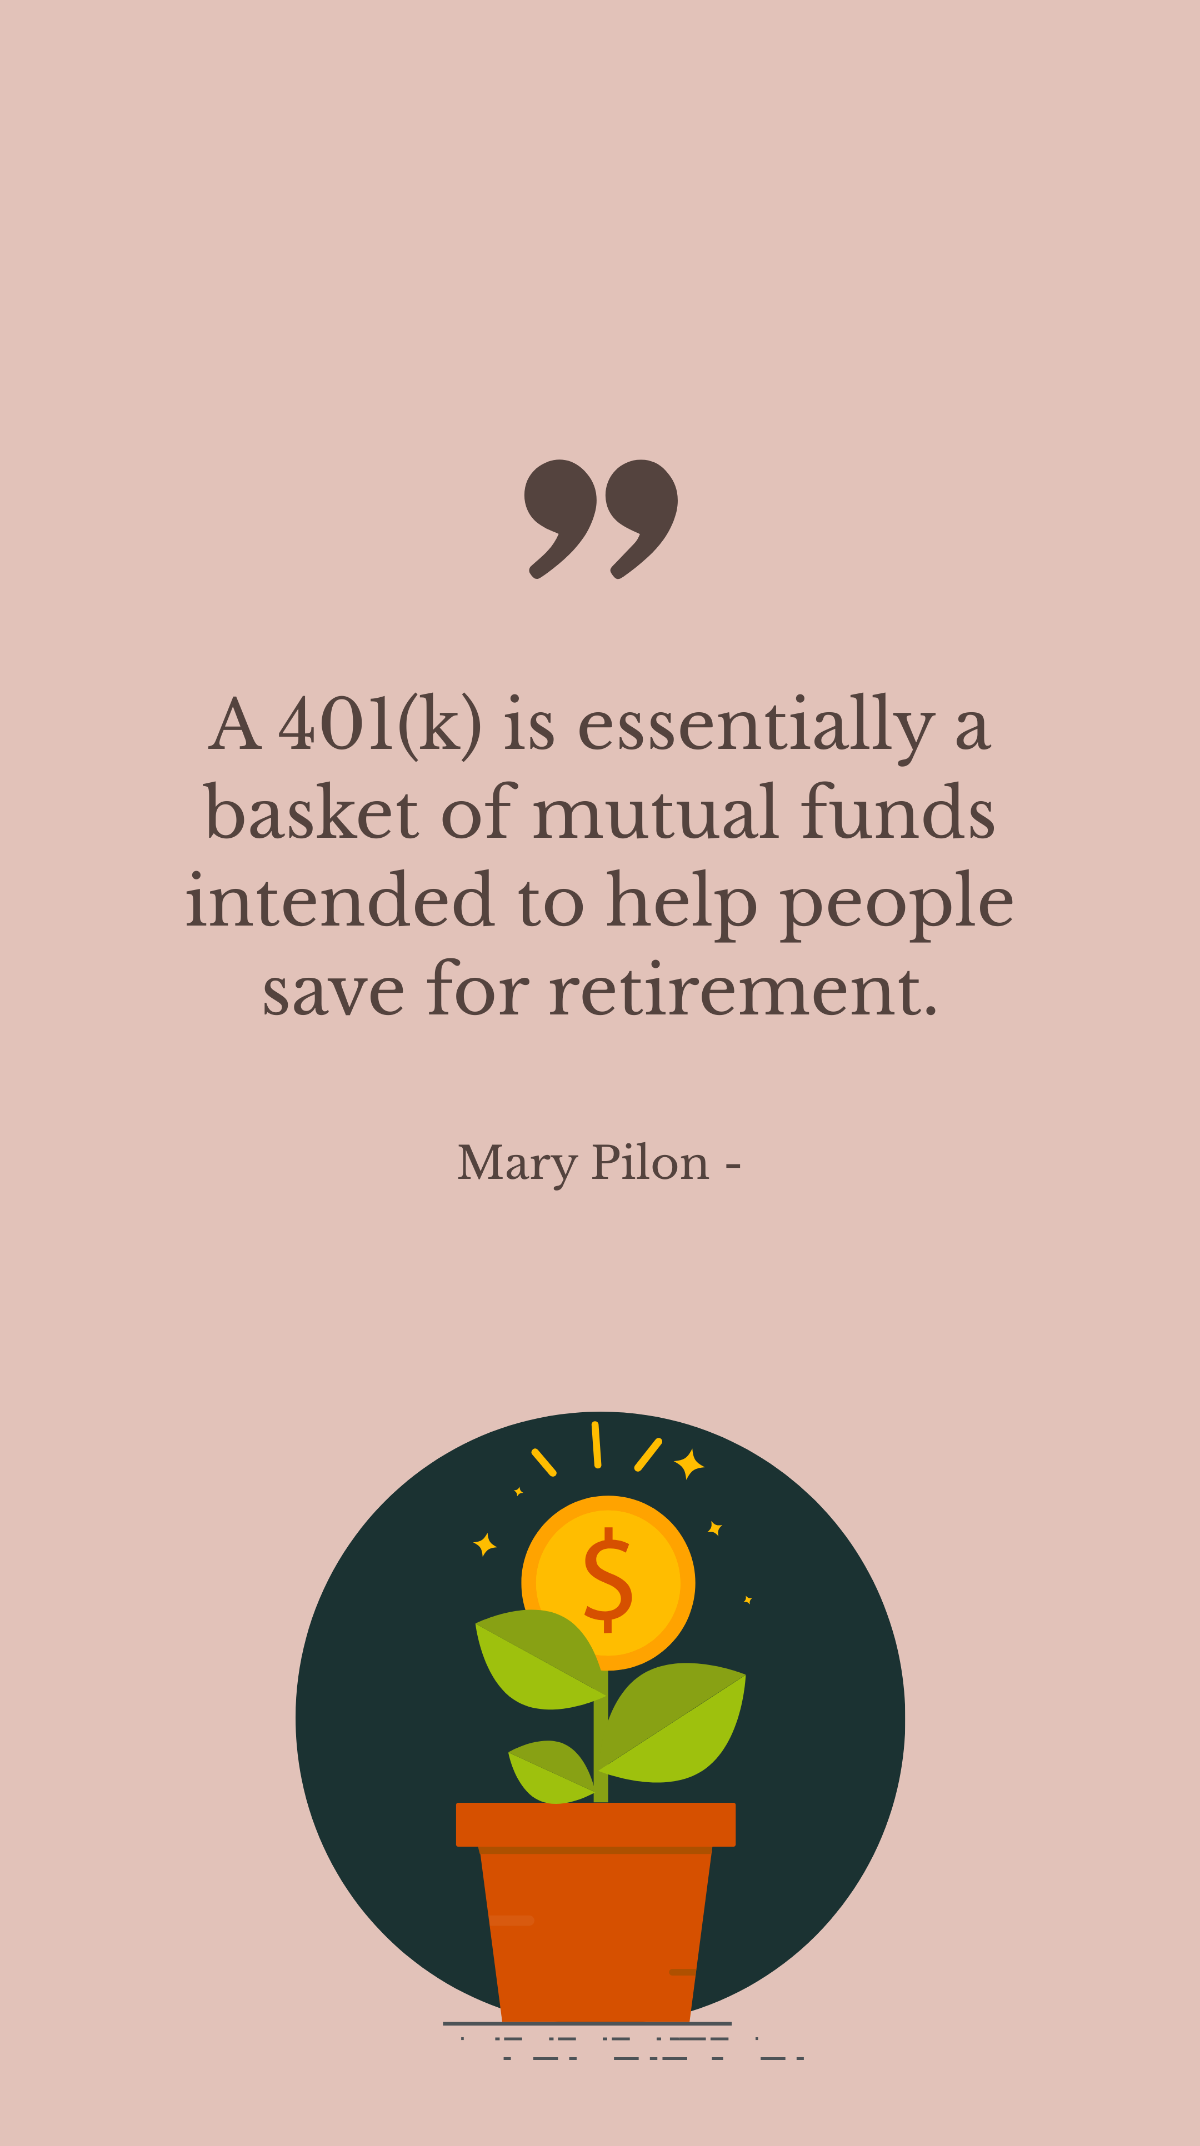 Mary Pilon - A 401(k) is essentially a basket of mutual funds intended to help people save for retirement.